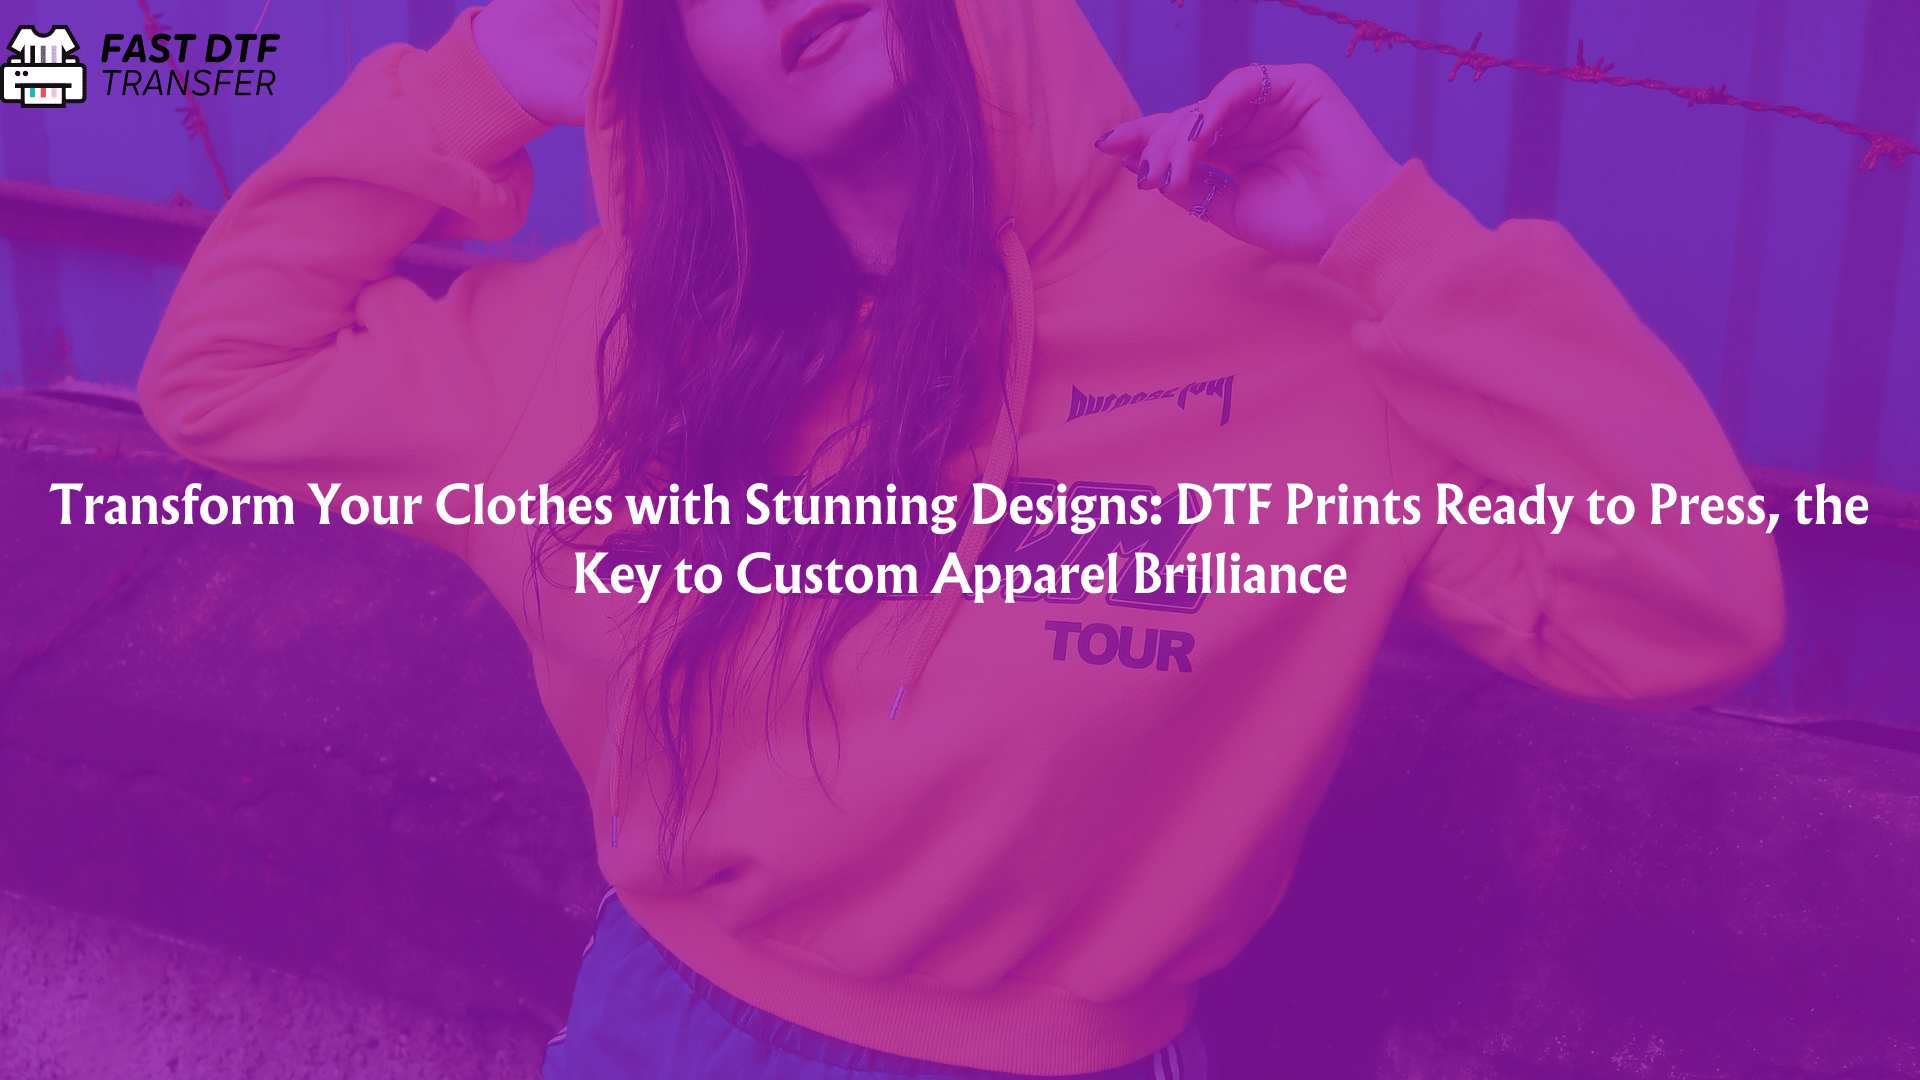 Transform Your Clothes with Stunning Designs: DTF Prints Ready to Press, the Key to Custom Apparel Brilliance